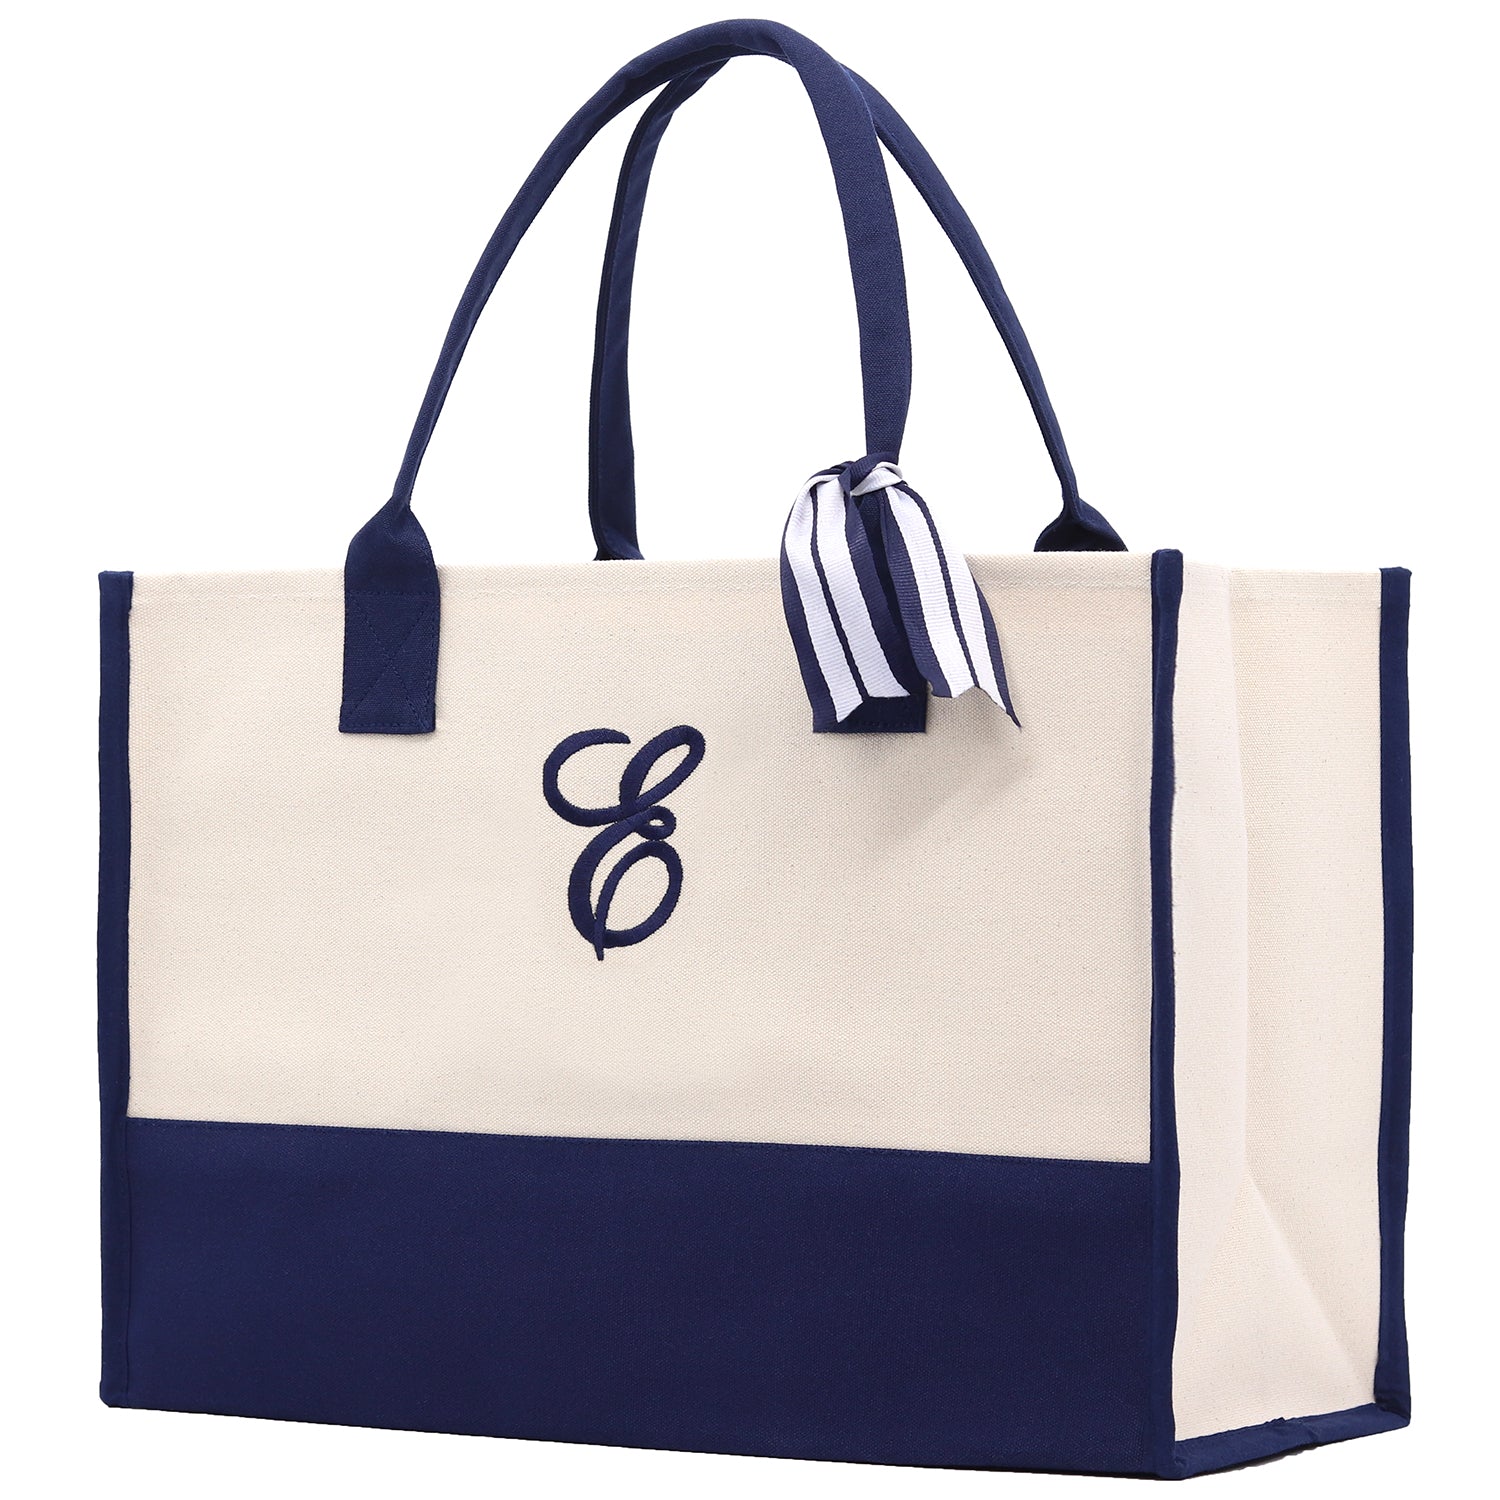 Monogram Tote Bag with 100% Cotton Canvas and a Chic Personalized Monogram Navy Blue Vanessa Rosella Script E 